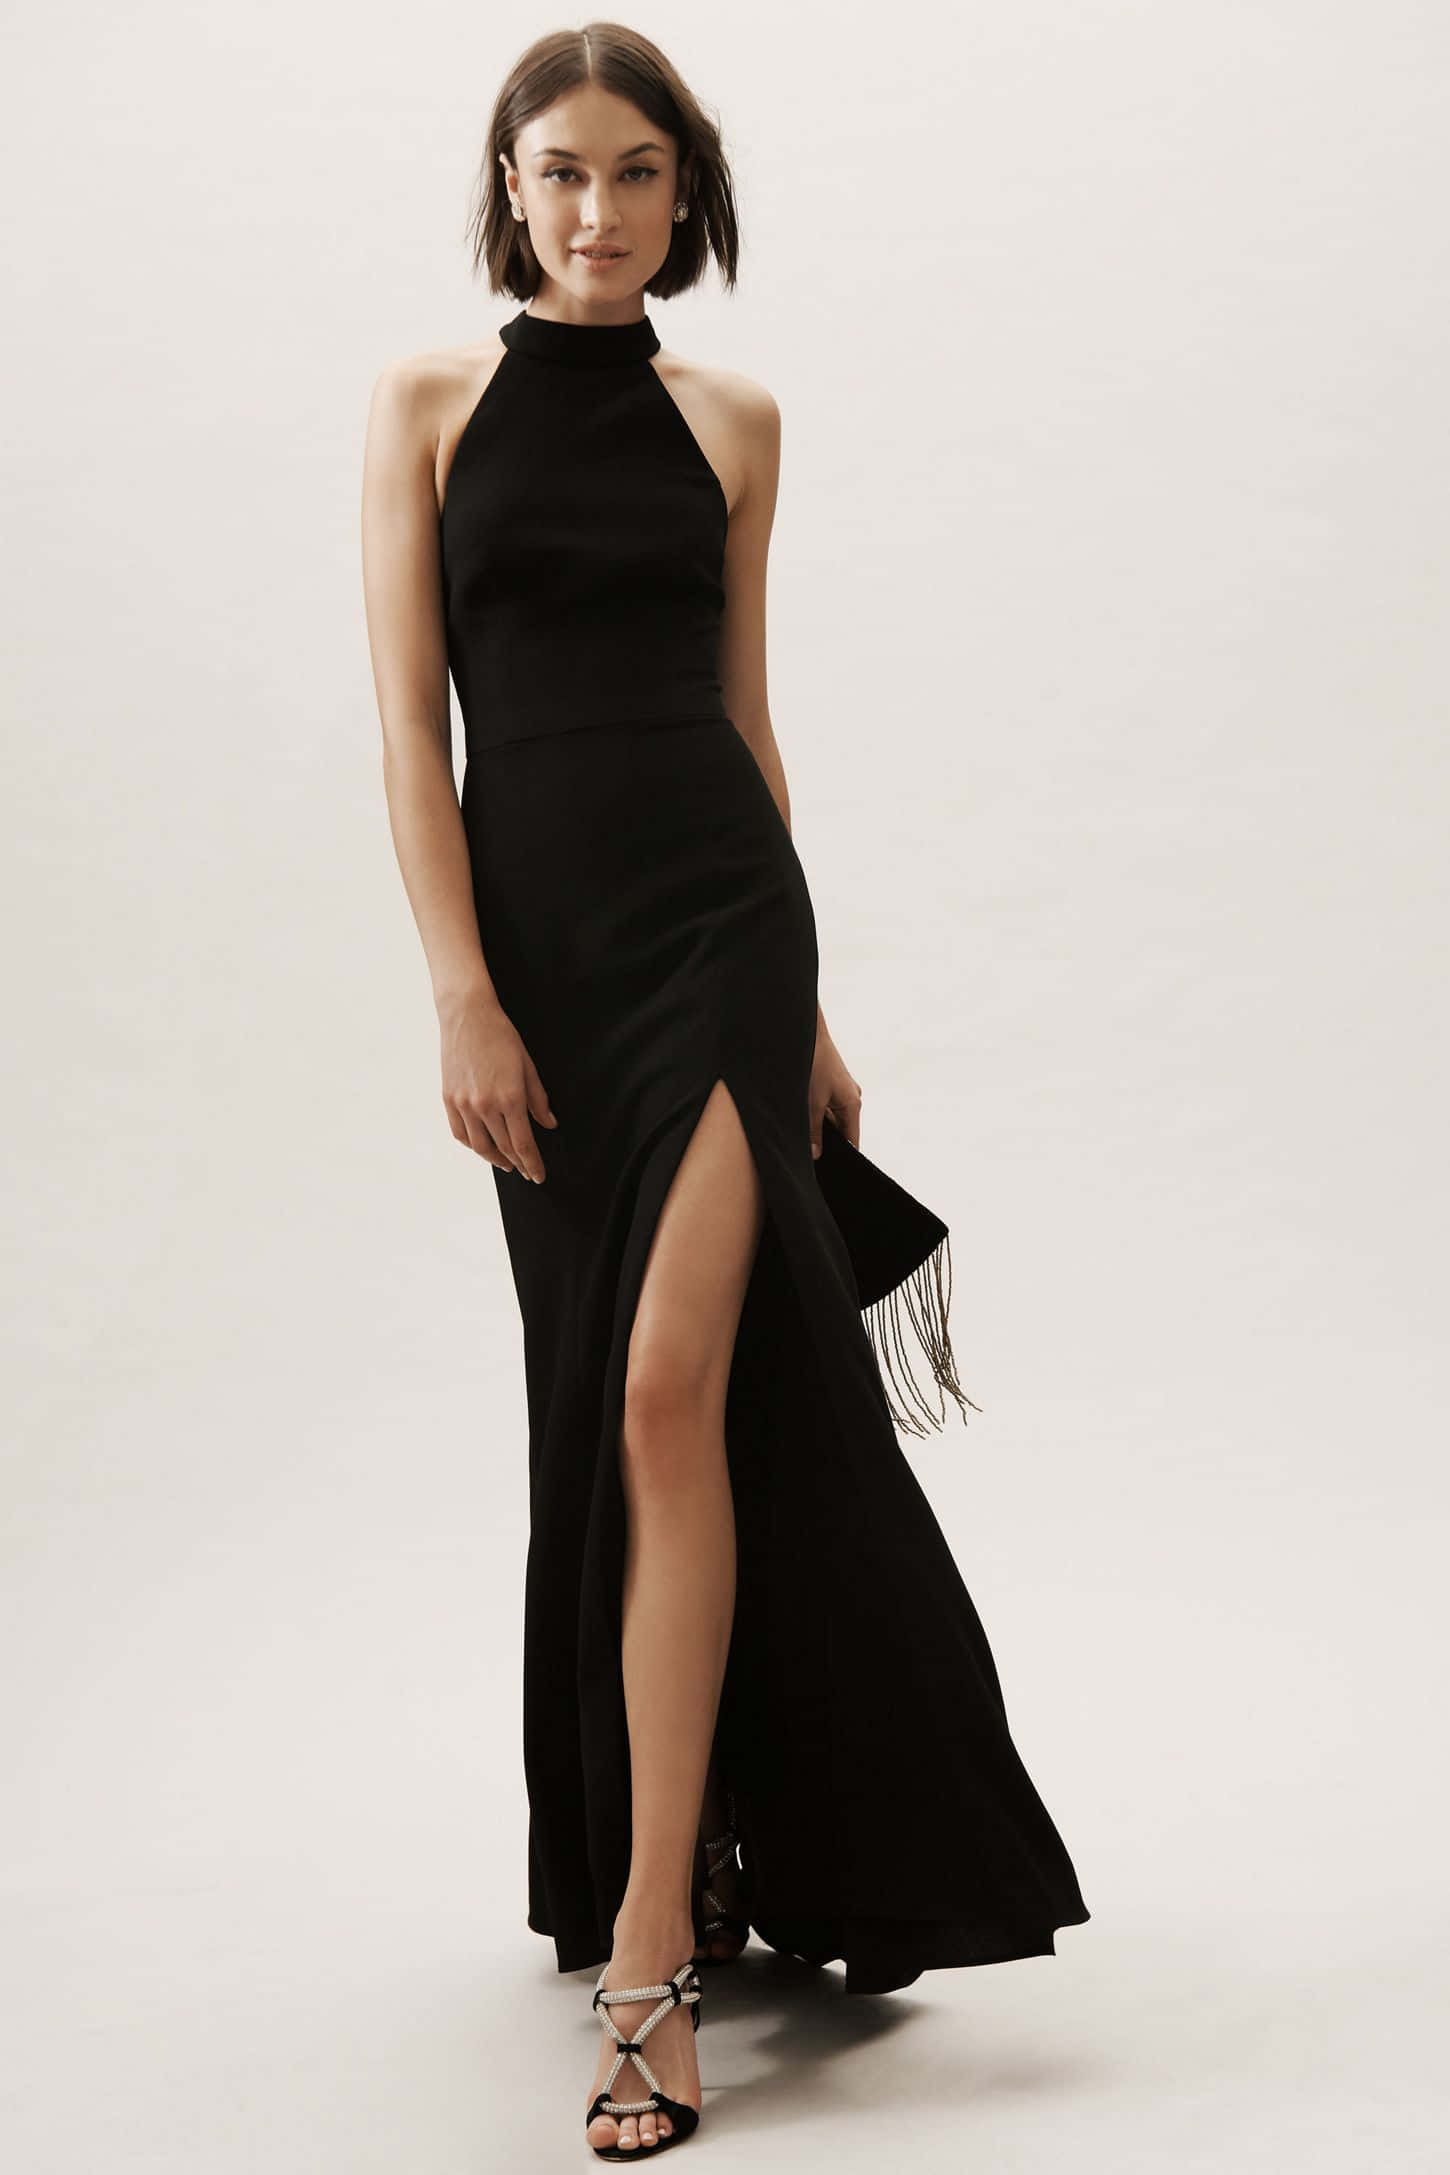 Look Ready to Shine in this Stylish Black Tie Dress Wallpaper